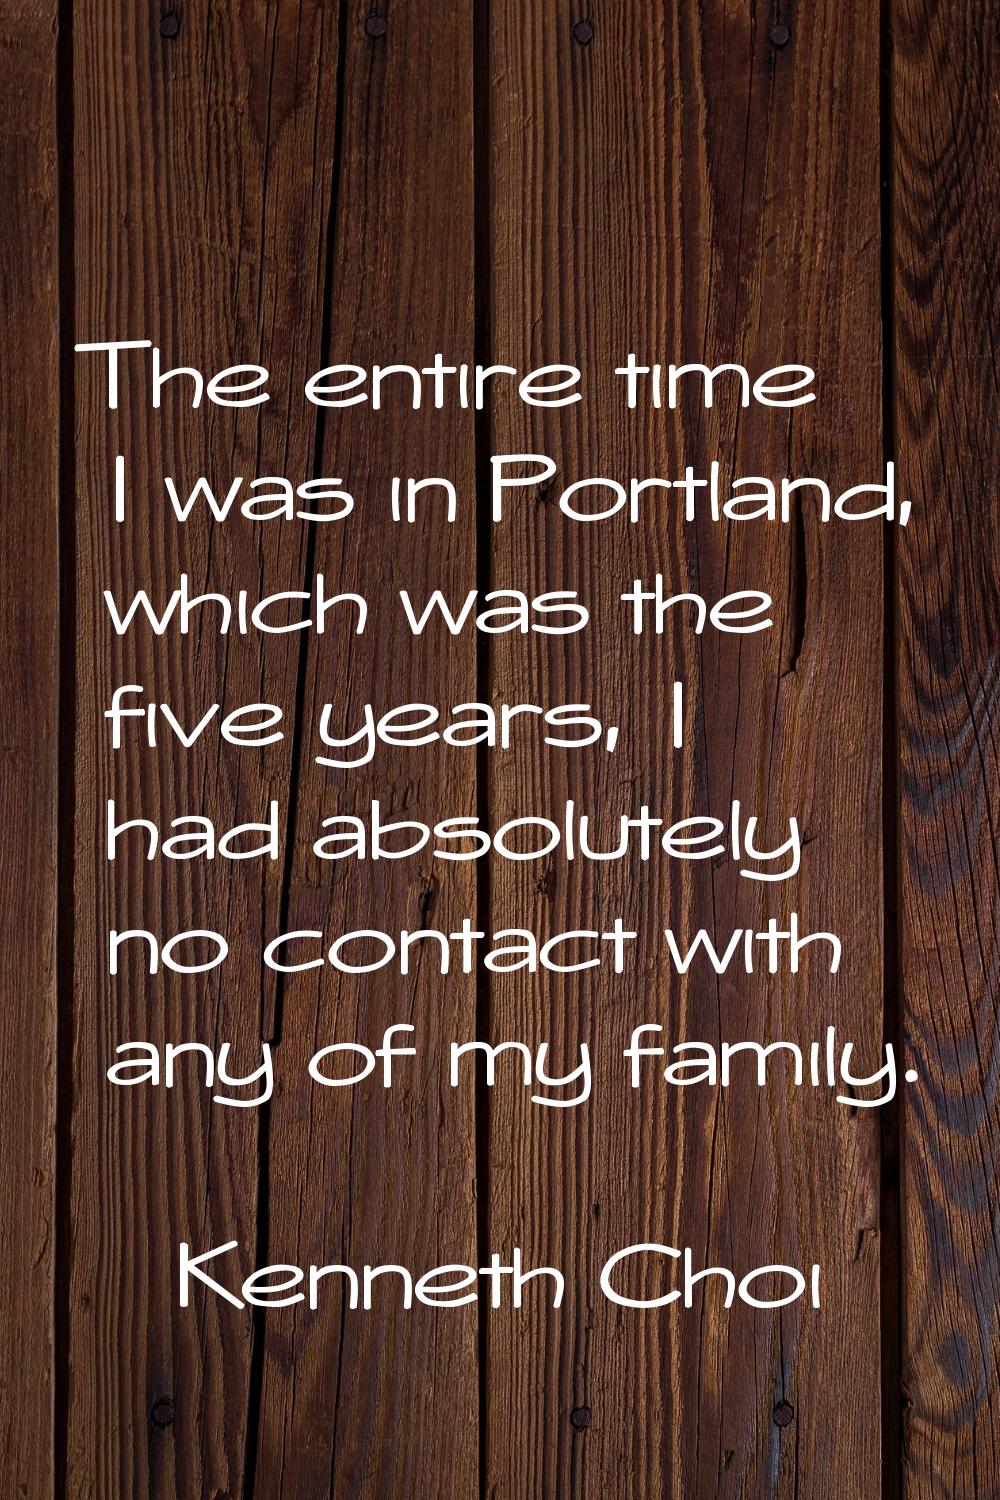 The entire time I was in Portland, which was the five years, I had absolutely no contact with any o